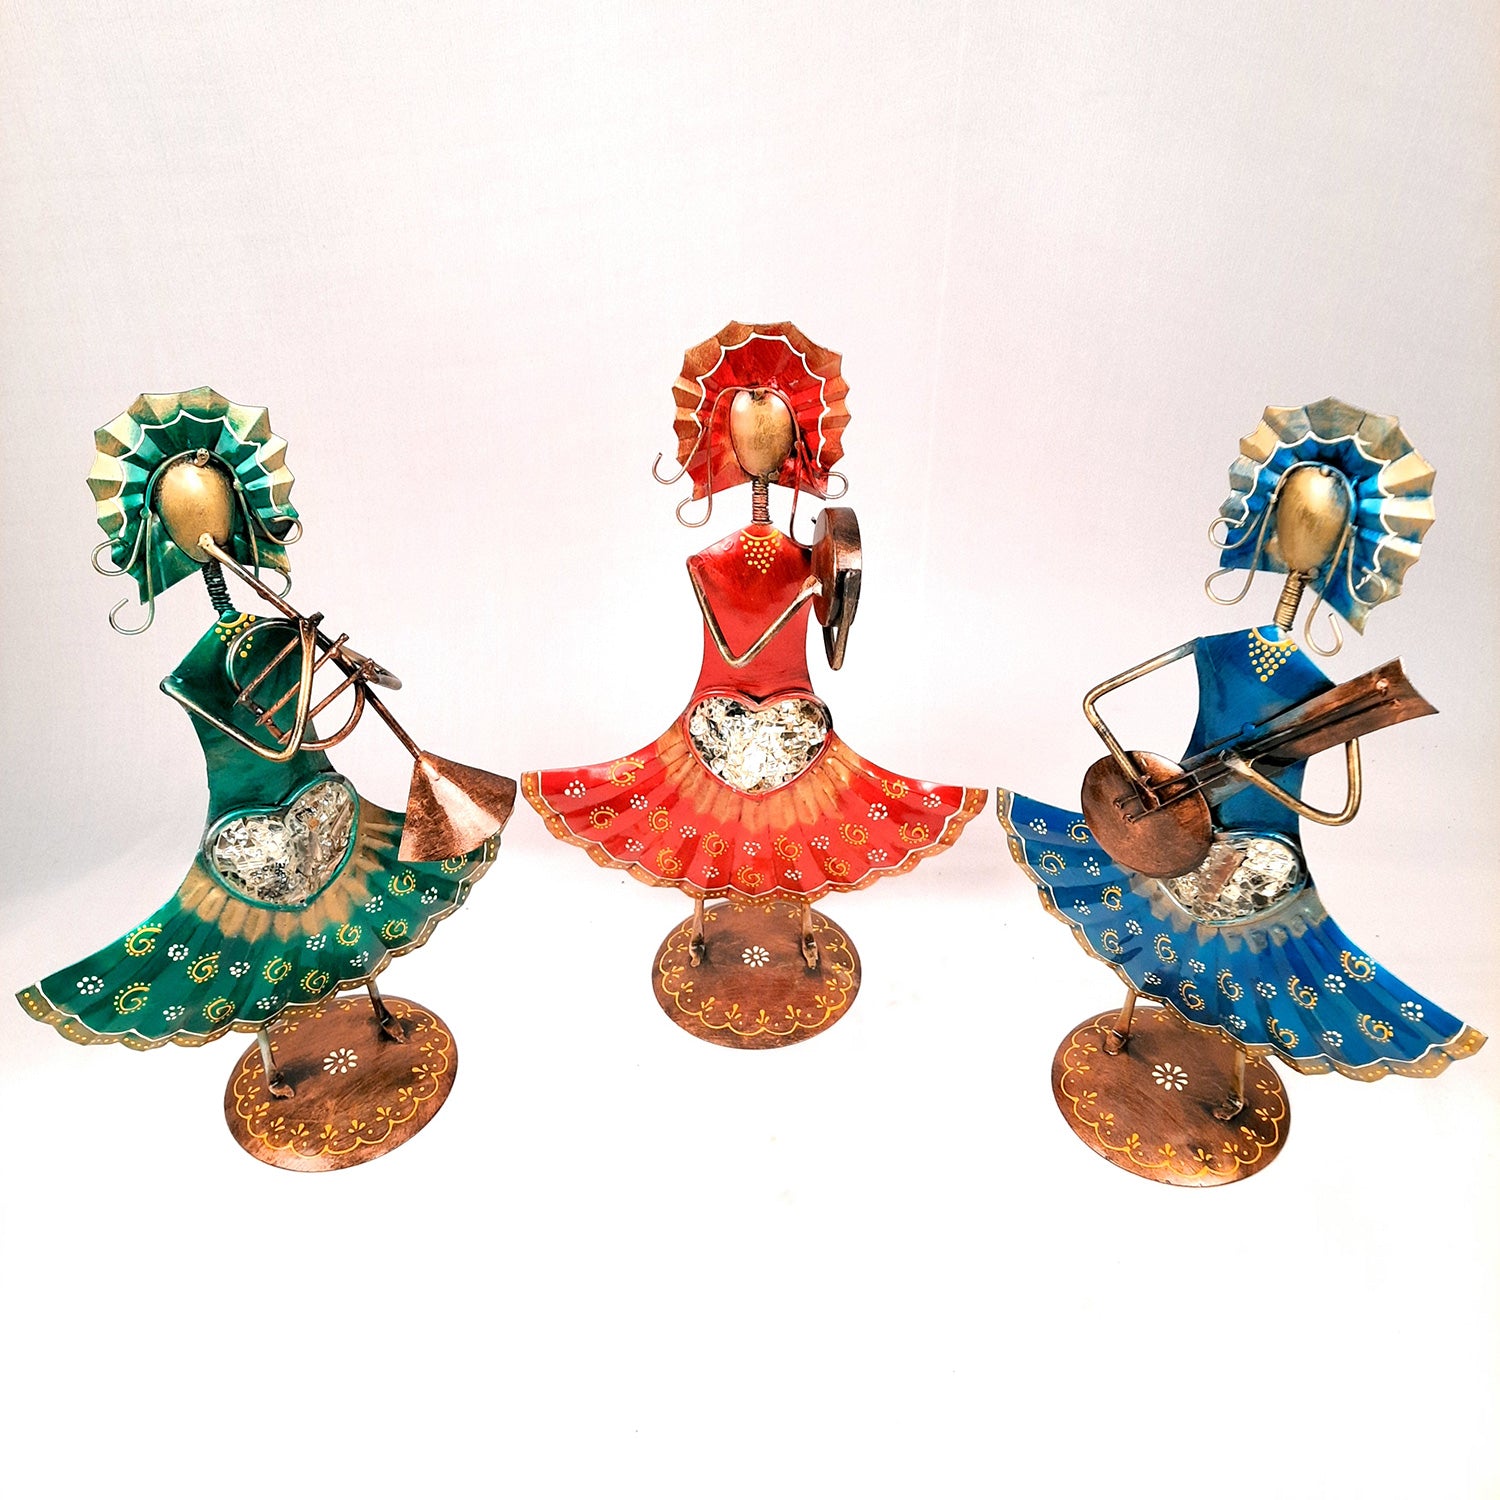 Musician Showpiece - Russian Musicians Playing Musical Instruments | Decorative Figurines - For Home, Table, Living Room, TV Unit, Bedroom Decor | Handicraft Gifts -14 Inch (Set of 3) - Apkamart